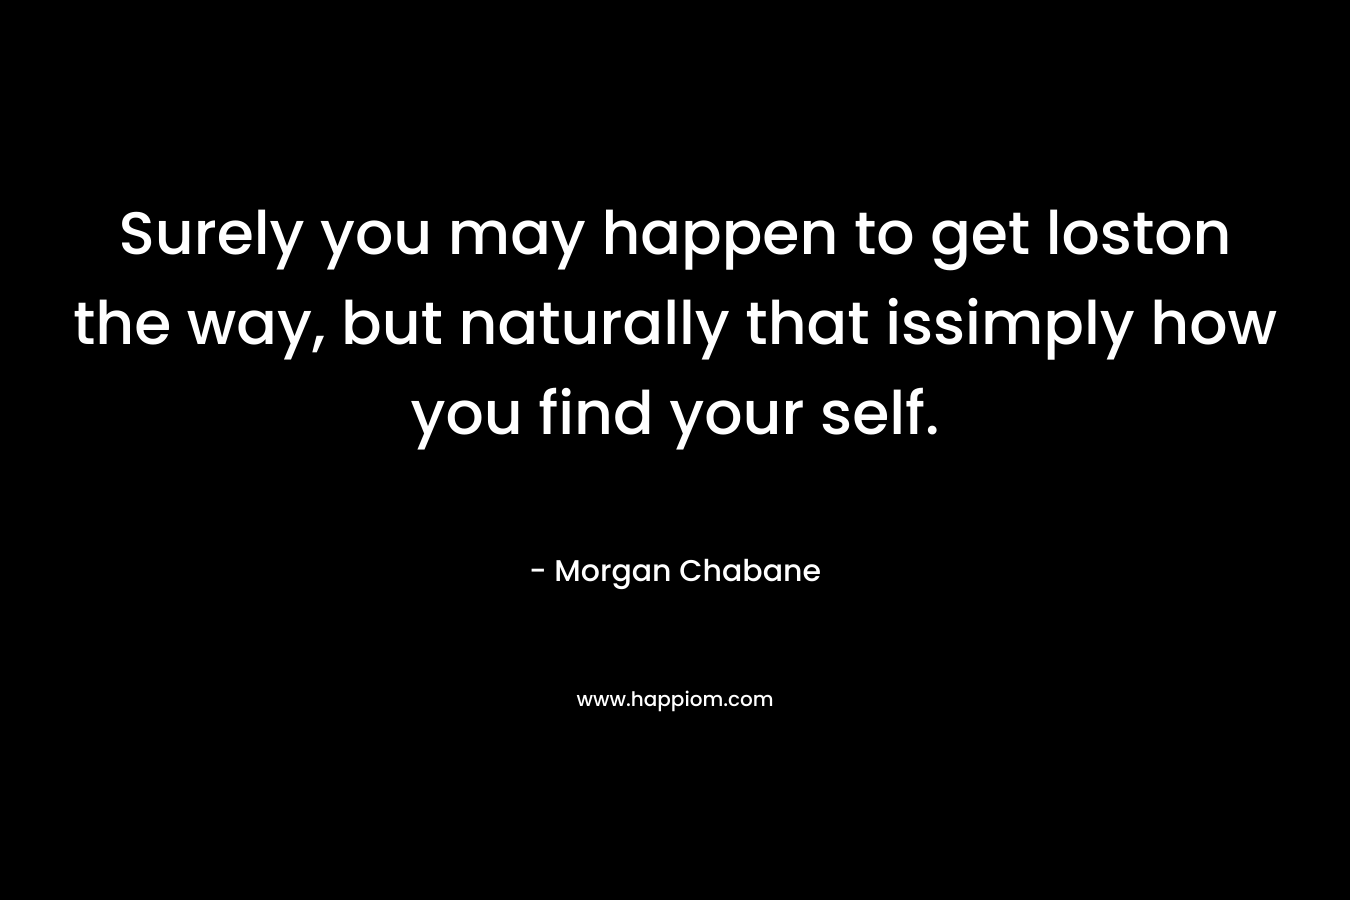 Surely you may happen to get loston the way, but naturally that issimply how you find your self.